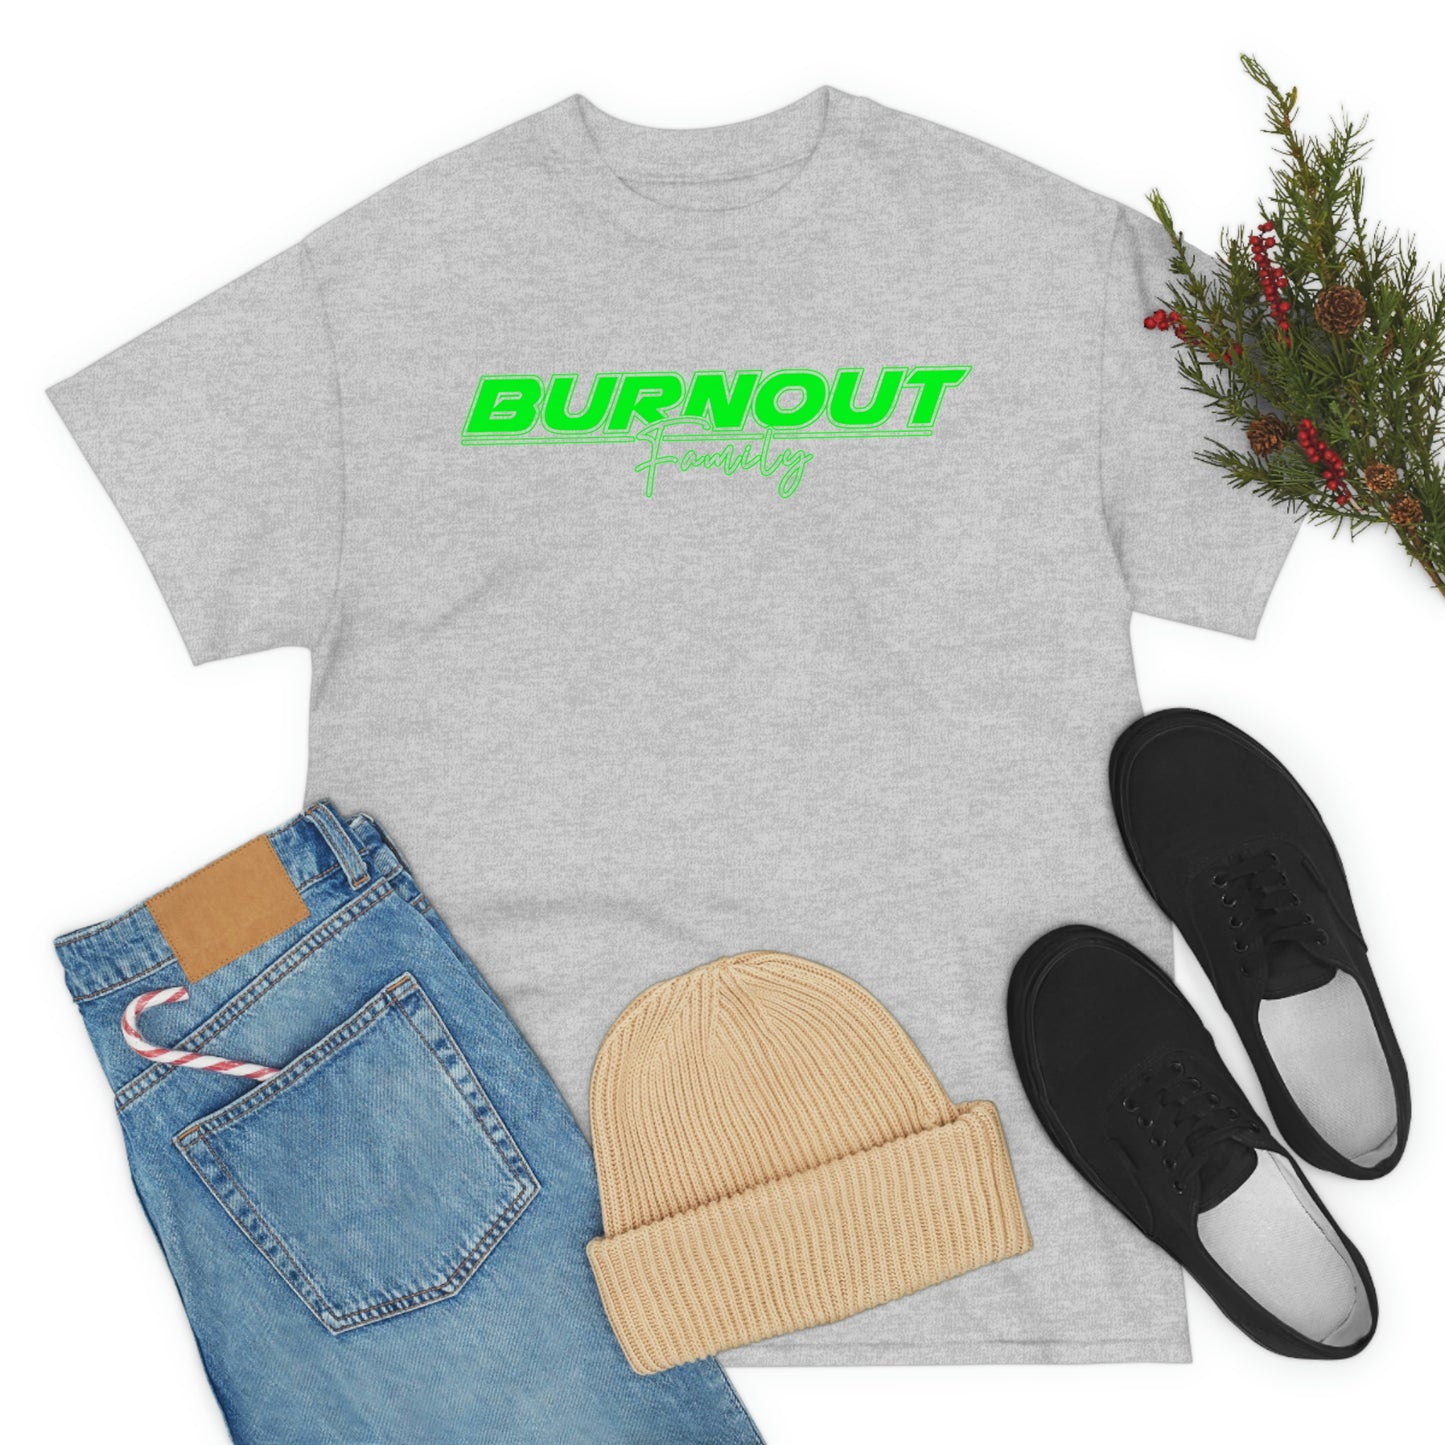 Burnout Family - 'GREEN IS NICE' FLURO